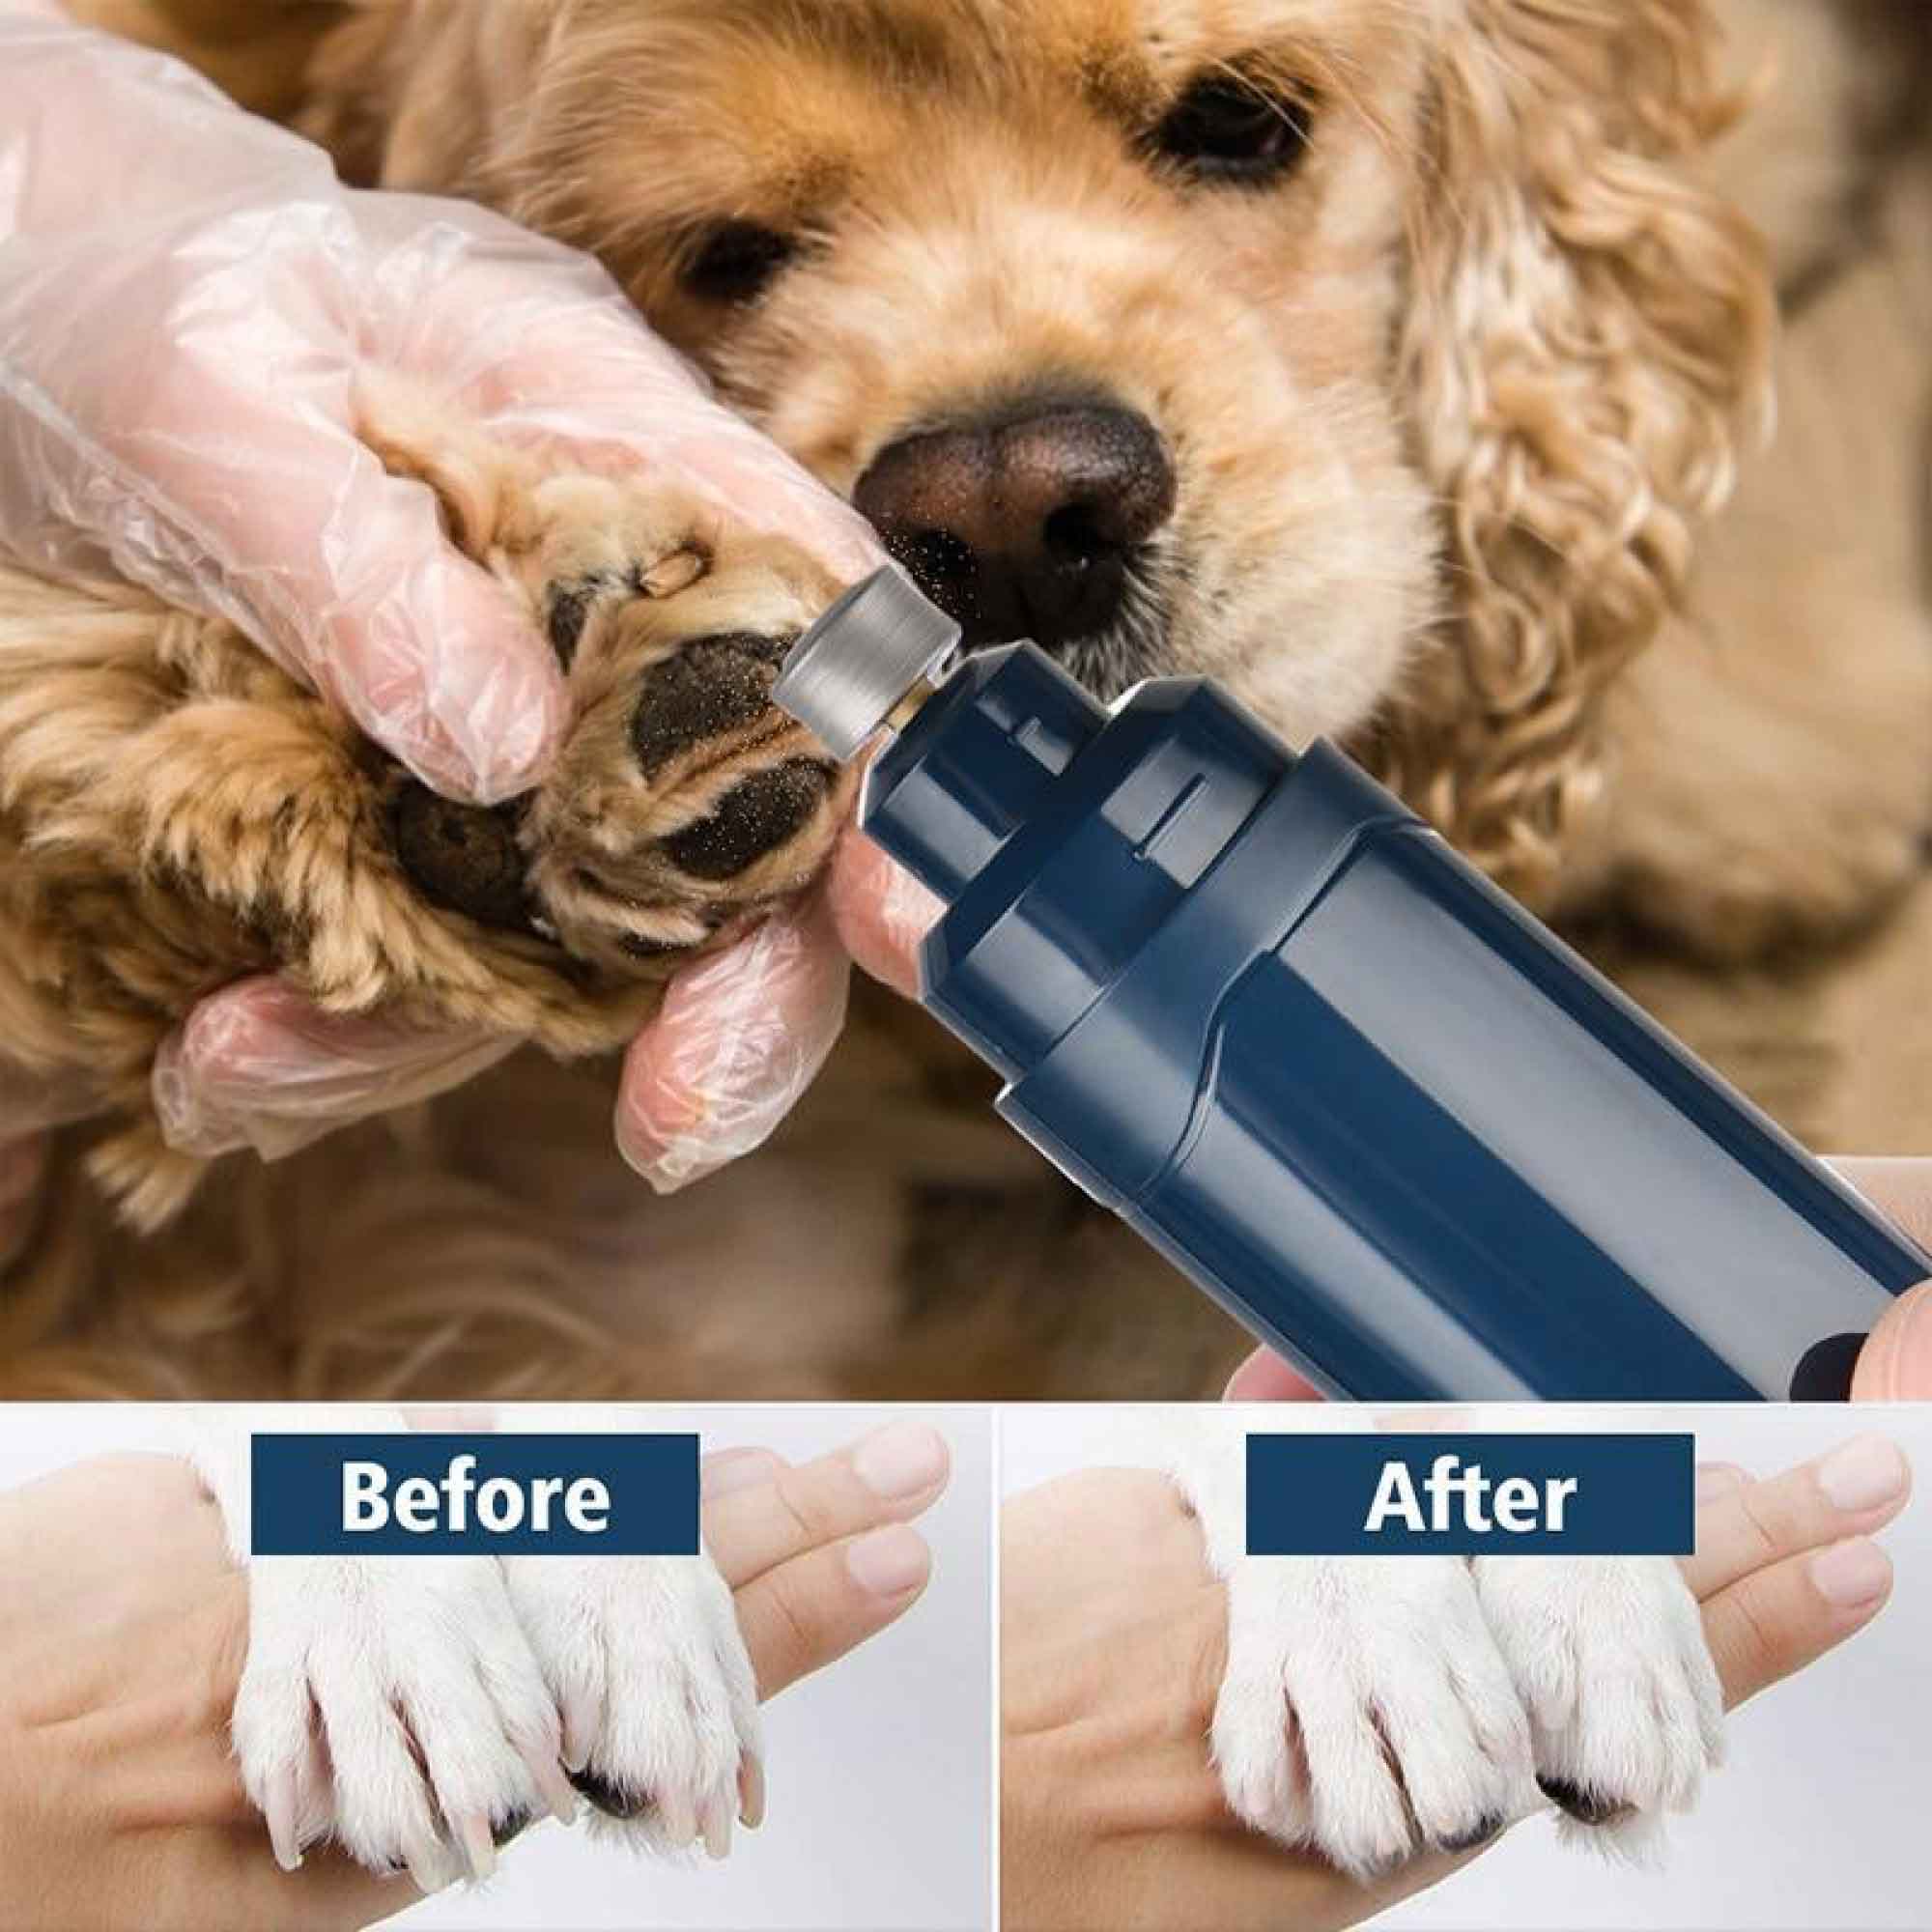 LuckyTail vs Casfuy: The Best Dog Nail Grinder - YouTube